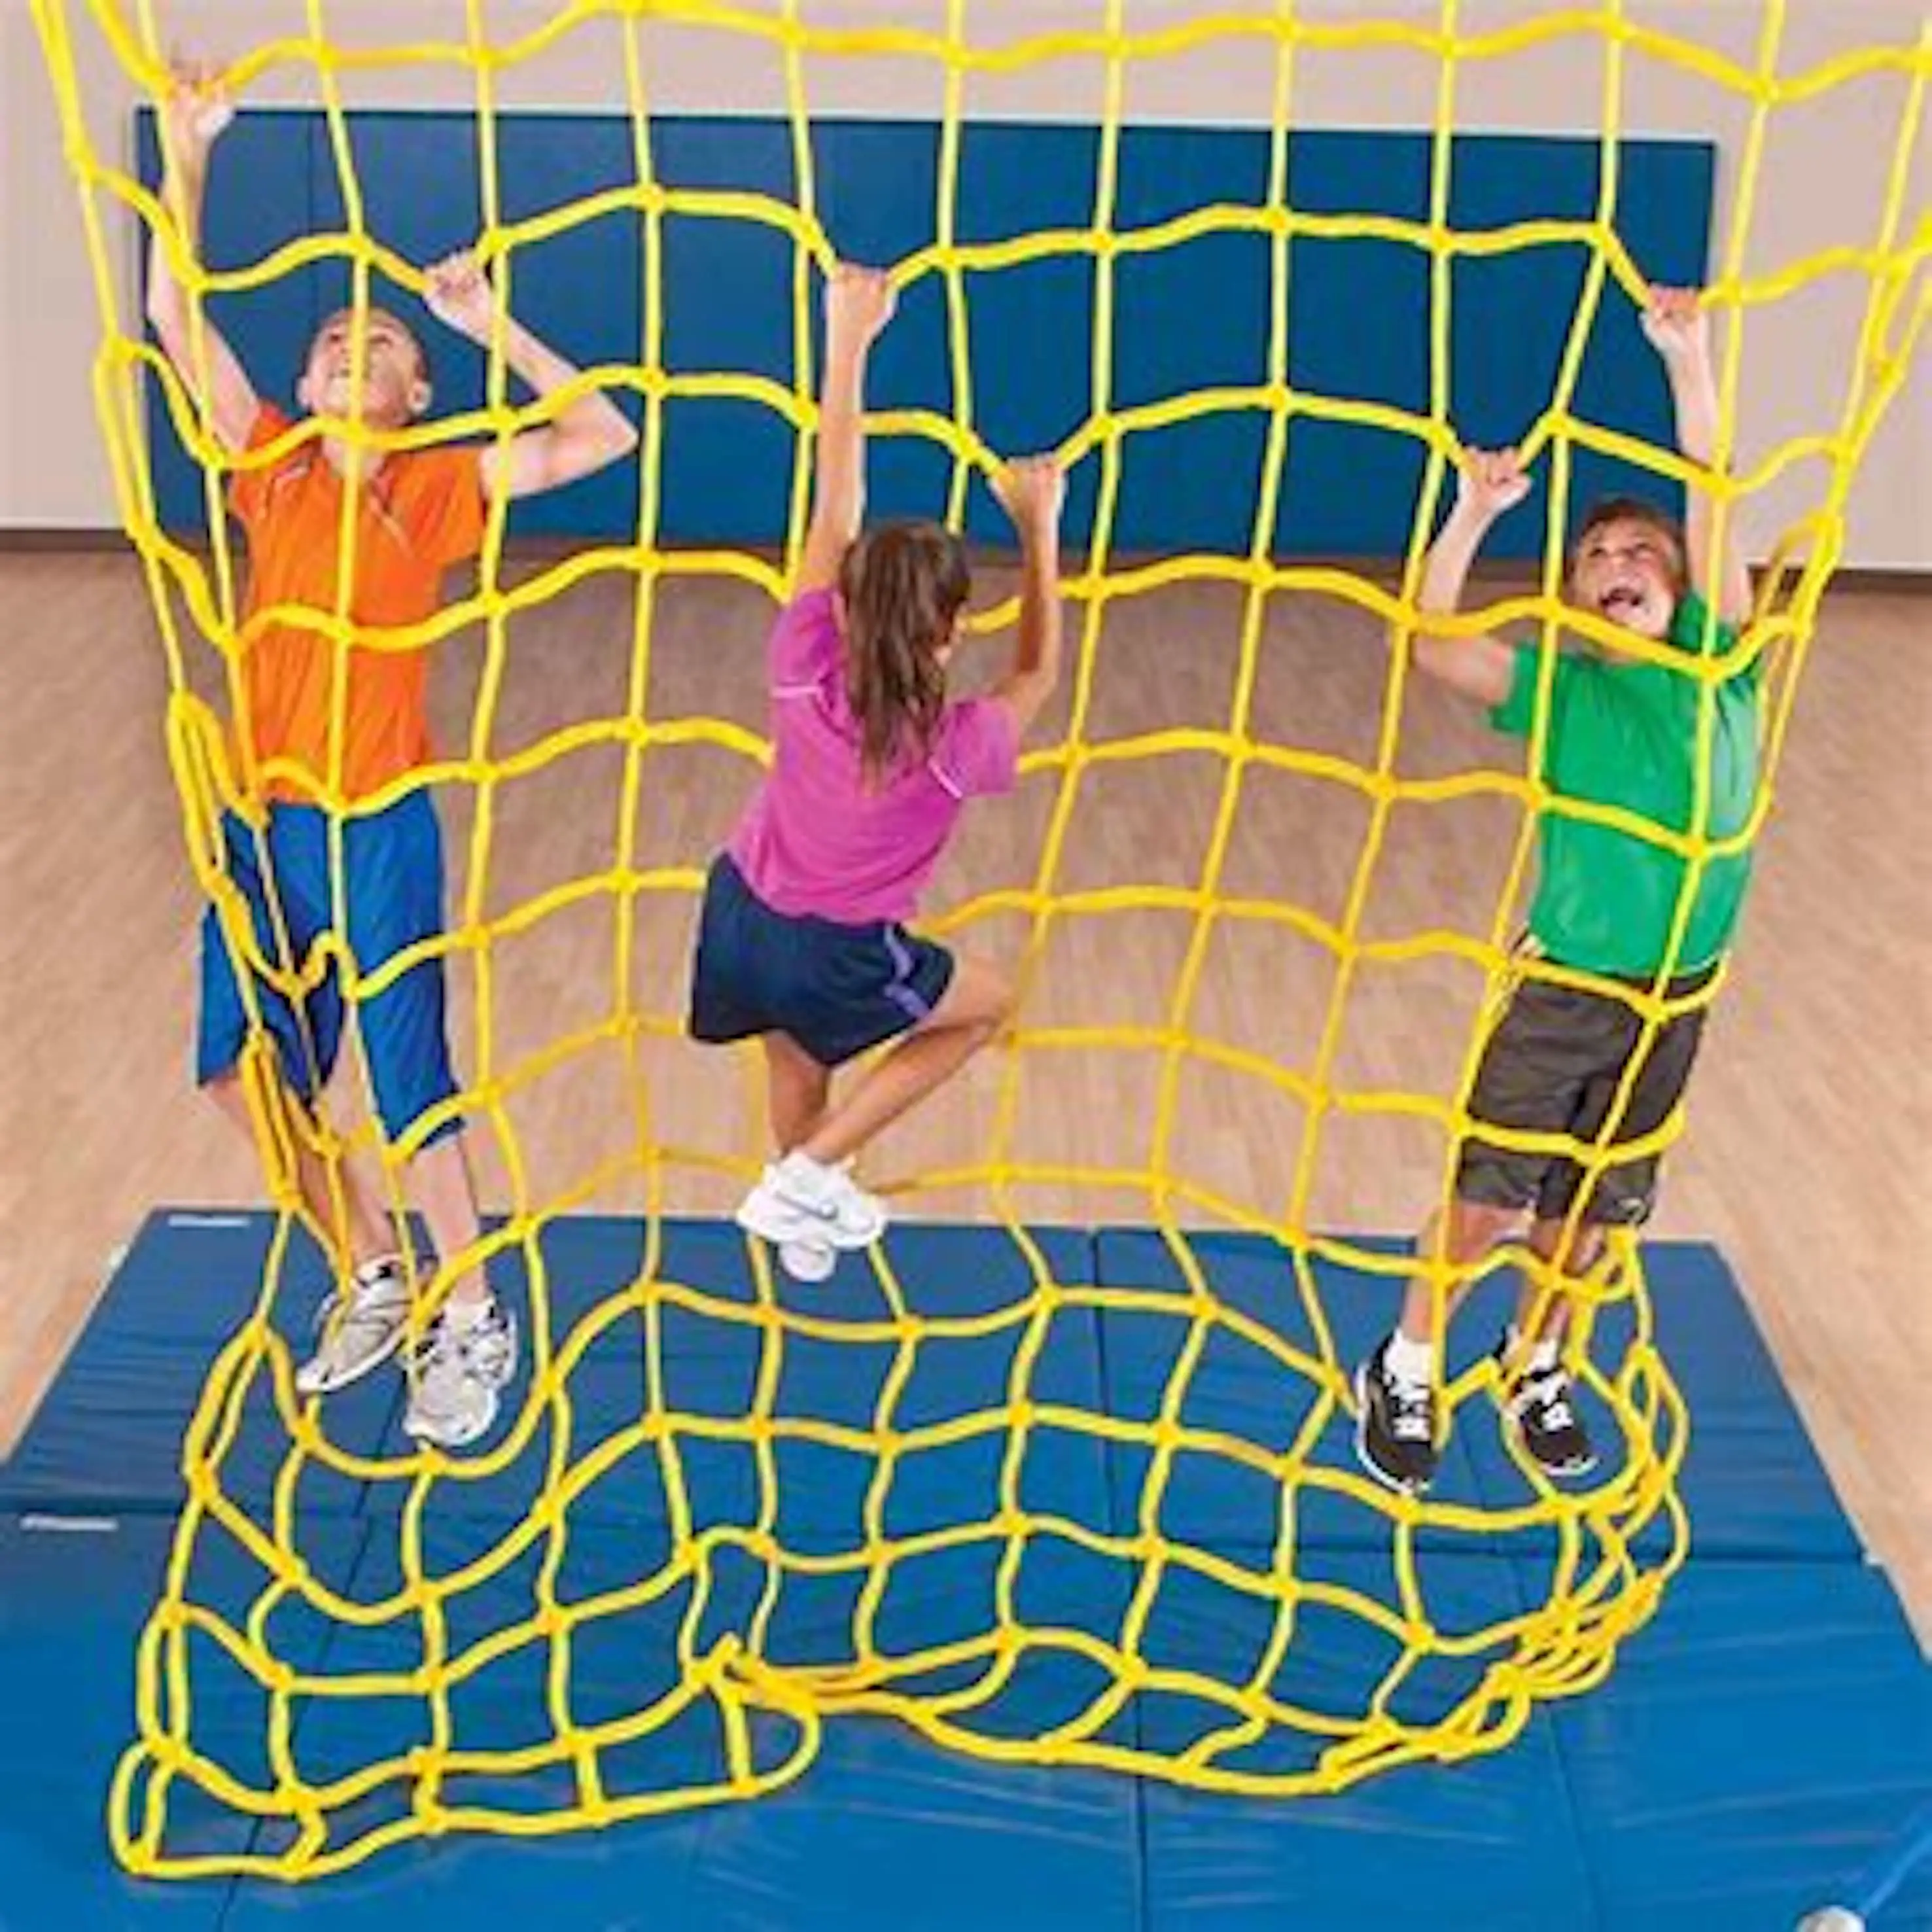 3 * 7ft Size:1 * 2m ZHAOFENGMING Kids Outdoor Climbing Frame Toddler Climbing Frame Outdoor Monkey Bars Climbing Frame Child Safety,safety Net Rope Bridge